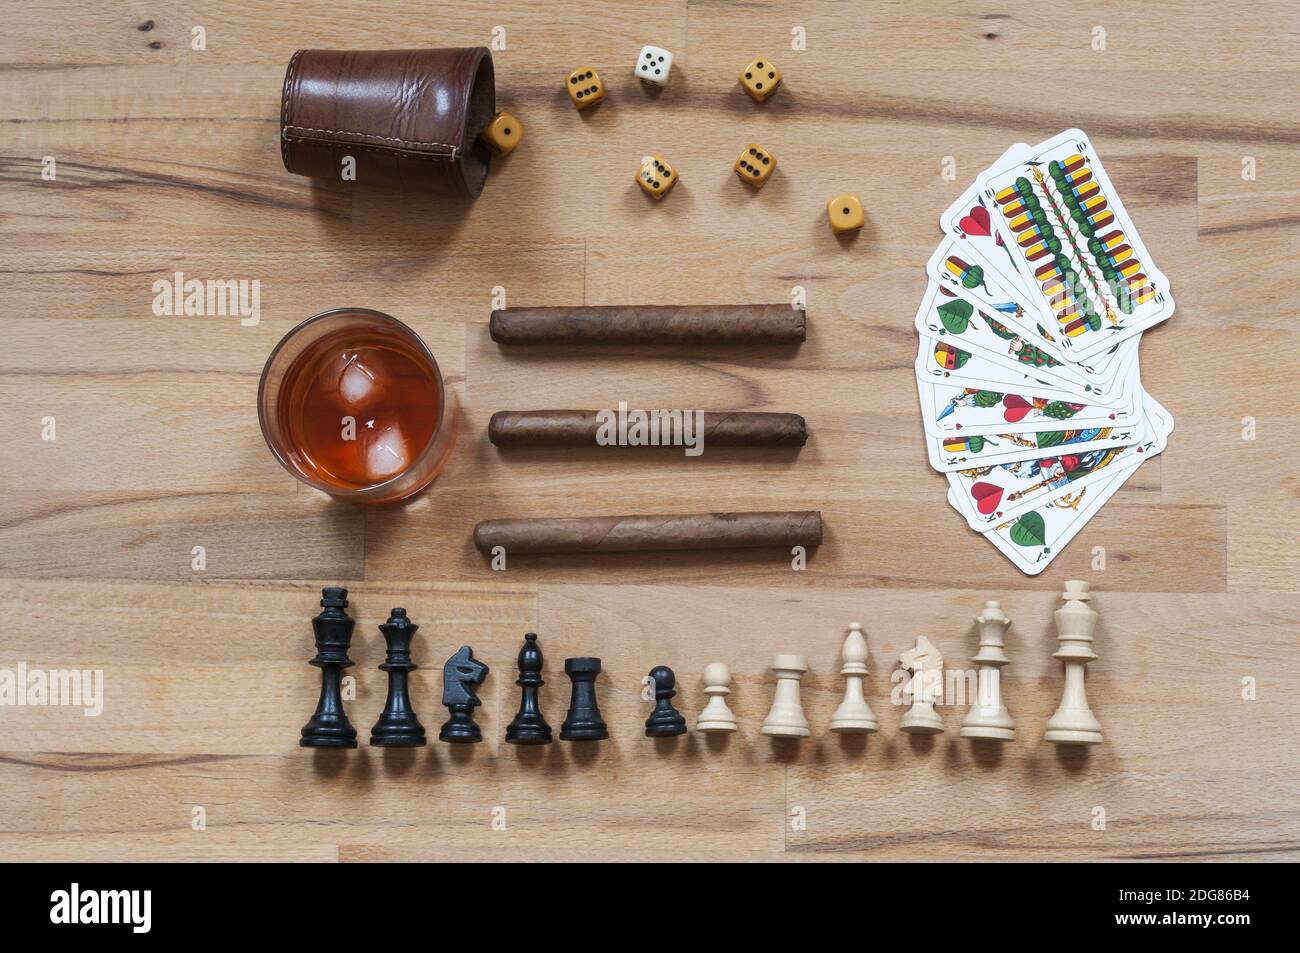 Dice game, chess piece, cards, cigars and alcoholic beverages Stock Photo